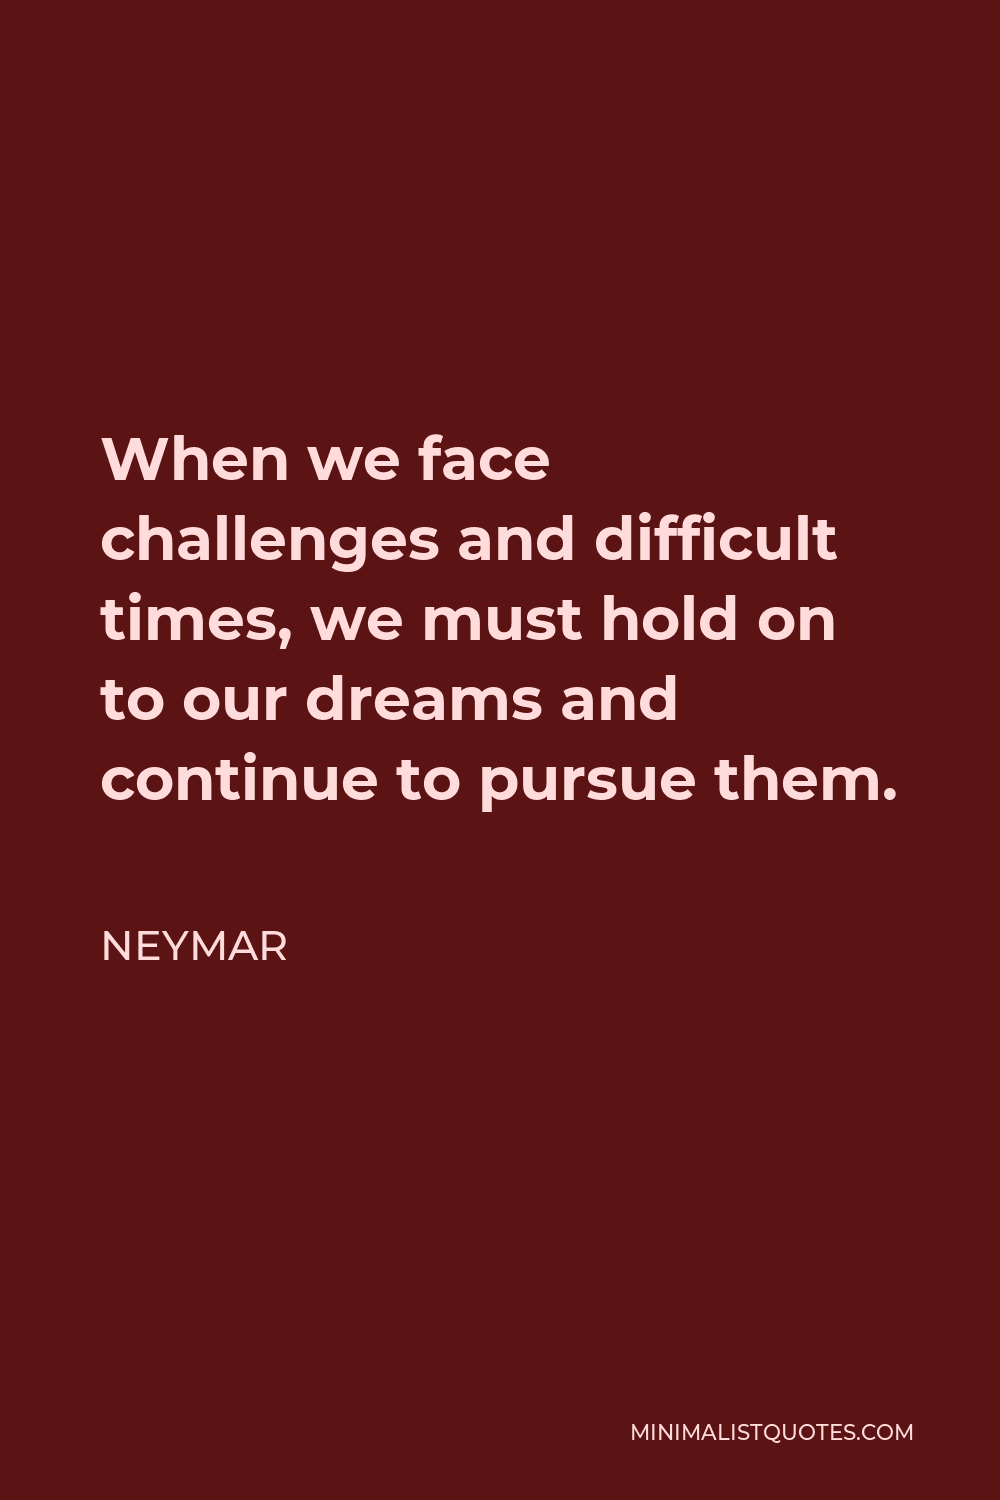 Neymar Quote - When we face challenges and difficult times, we must hold on to our dreams and continue to pursue them.